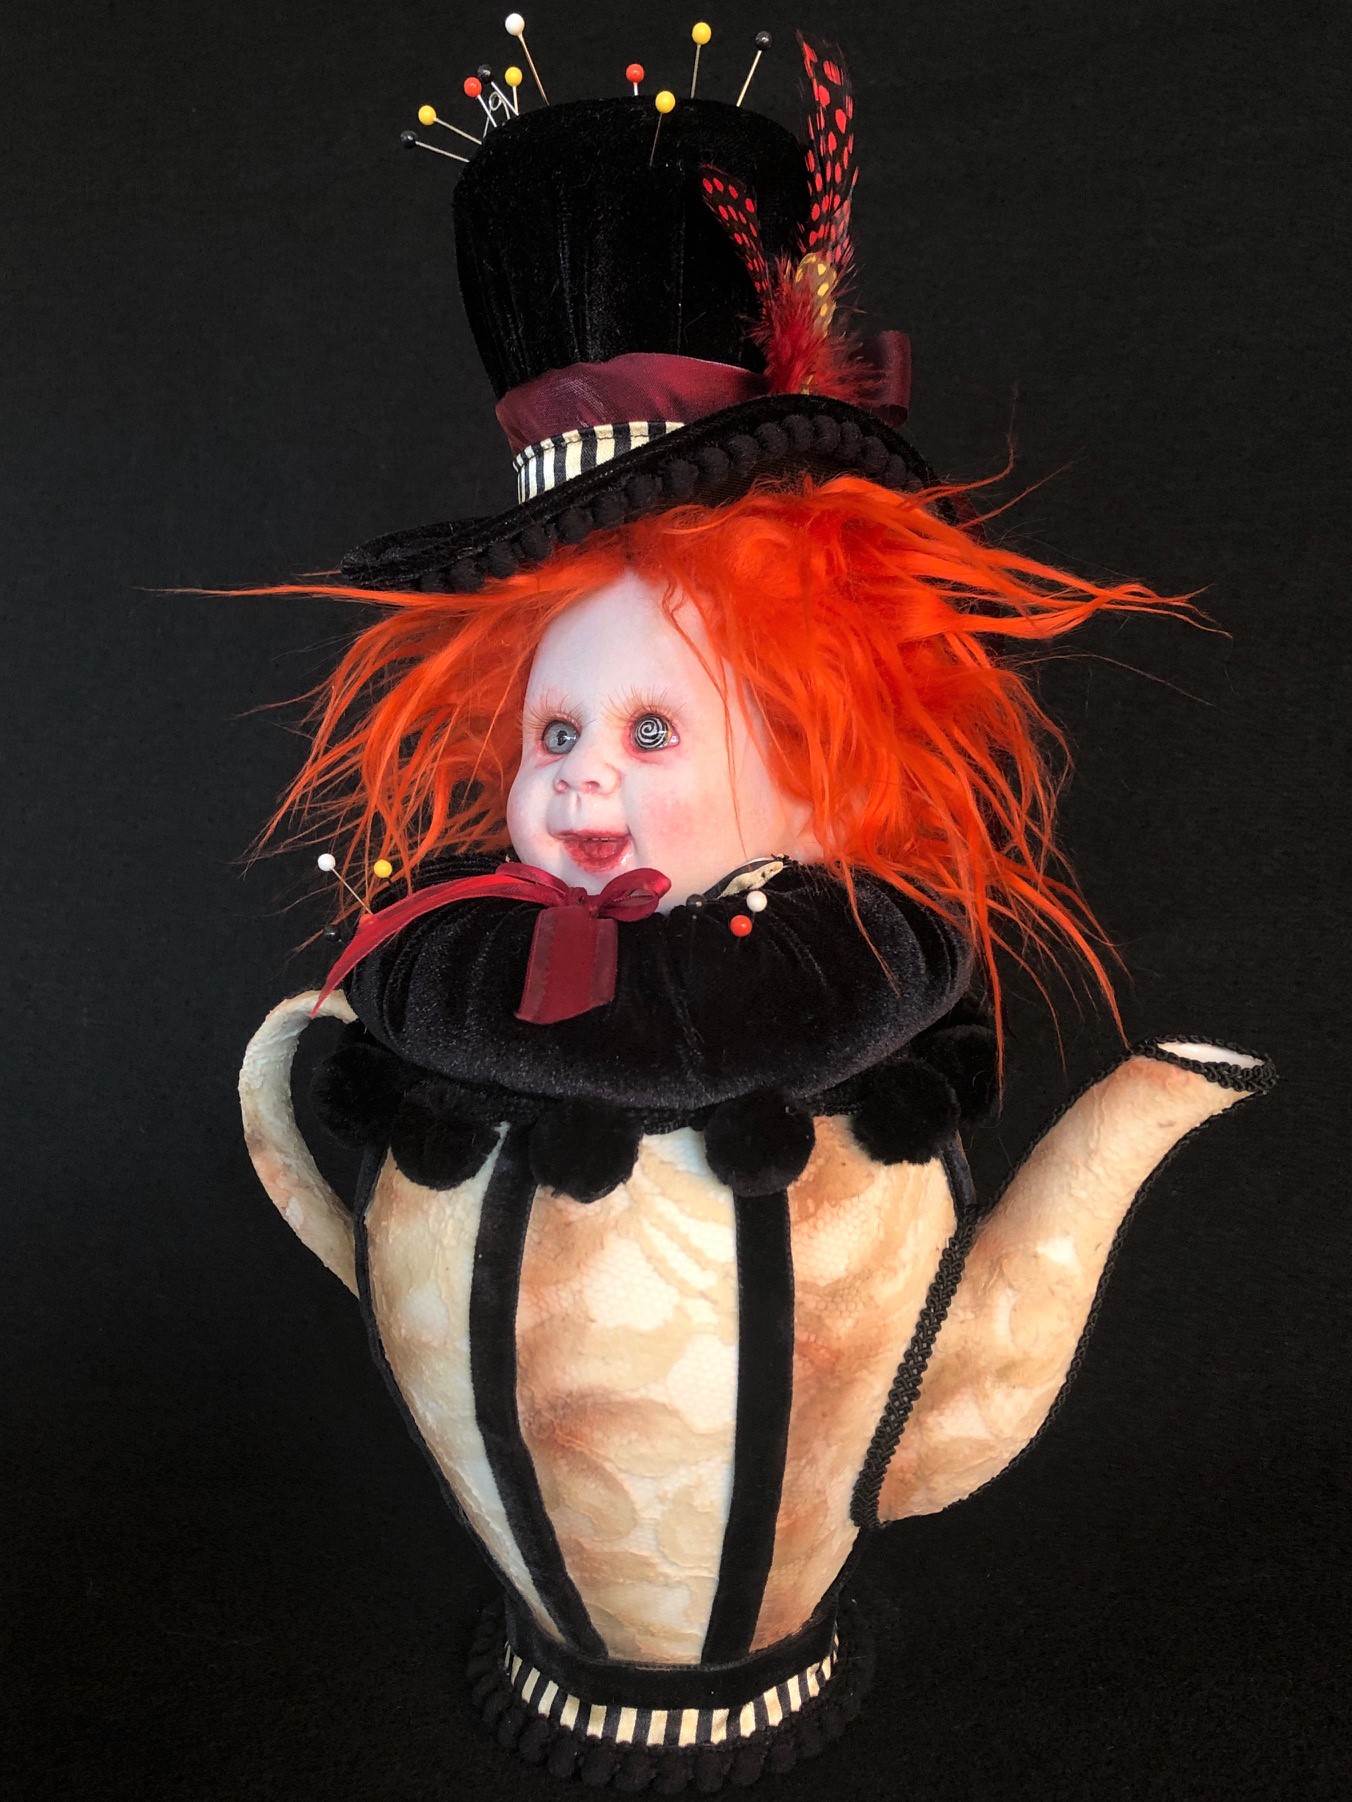 mad hatter themed pincushion porcelain doll head with bright orange hair and velvet tophat sits on a black velvet cushion set in lace-covered teapot